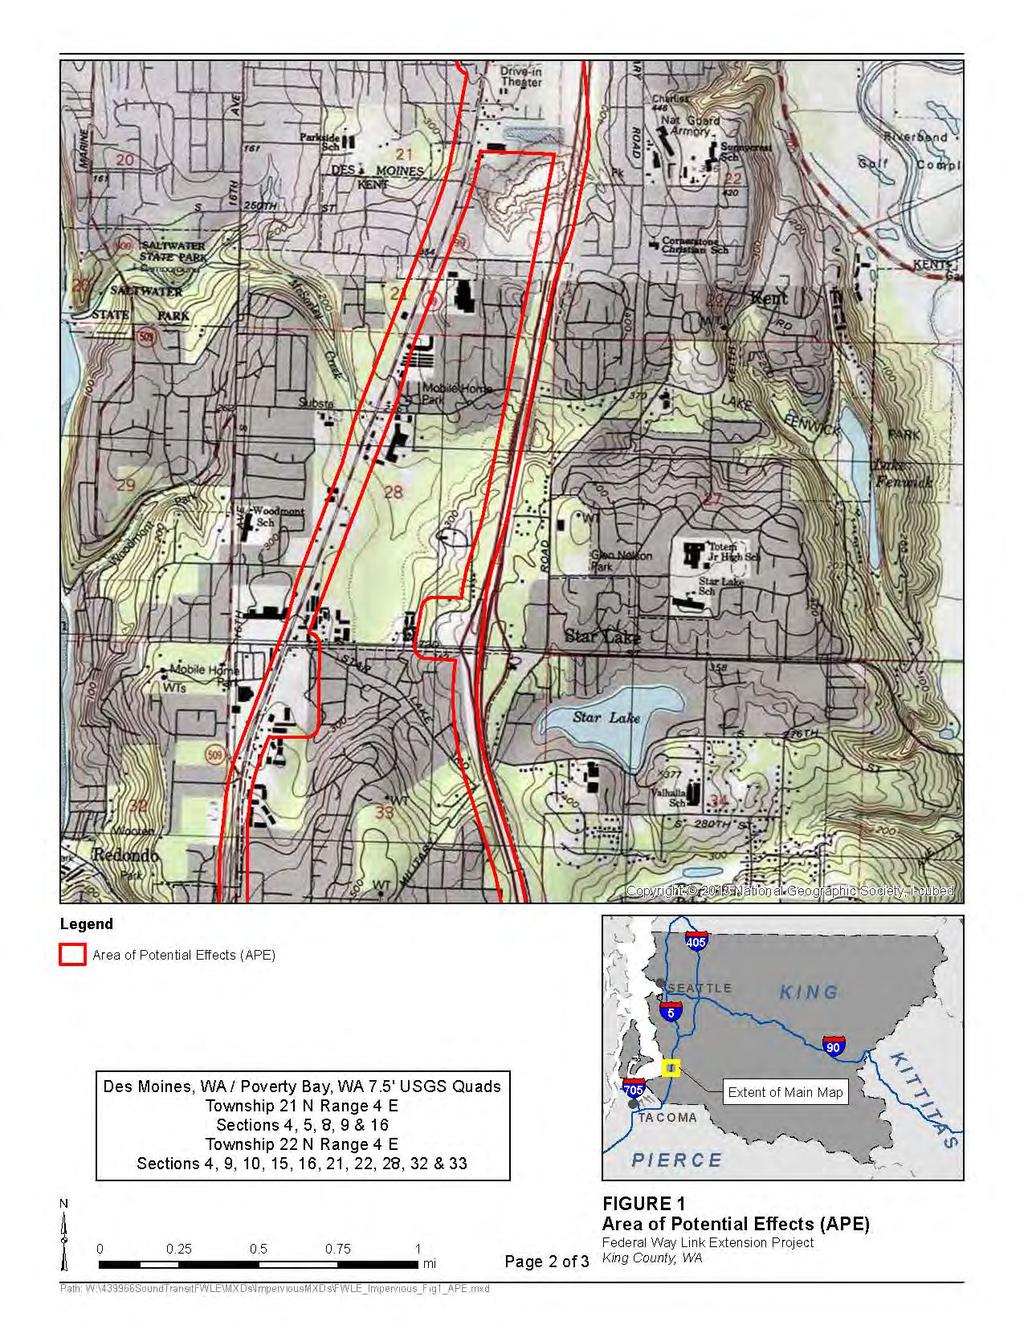 Federal Way Link Extension 6-5 Research Design for Archaeological Fieldwork March